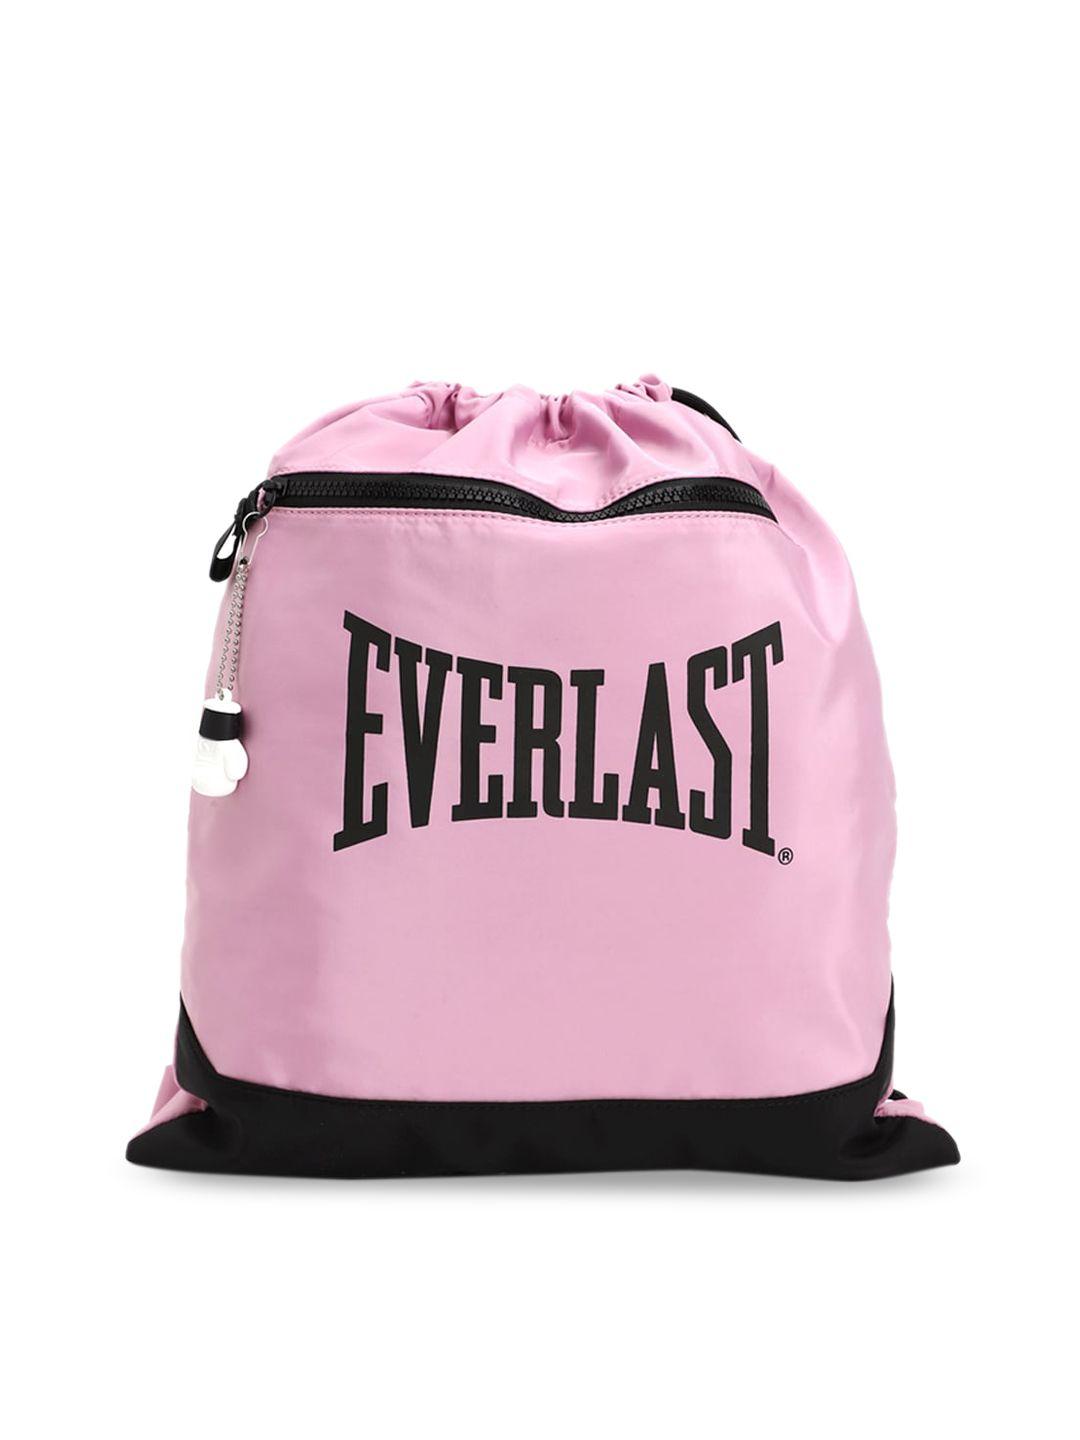 forever 21 pink pu swagger sling bag with fringed